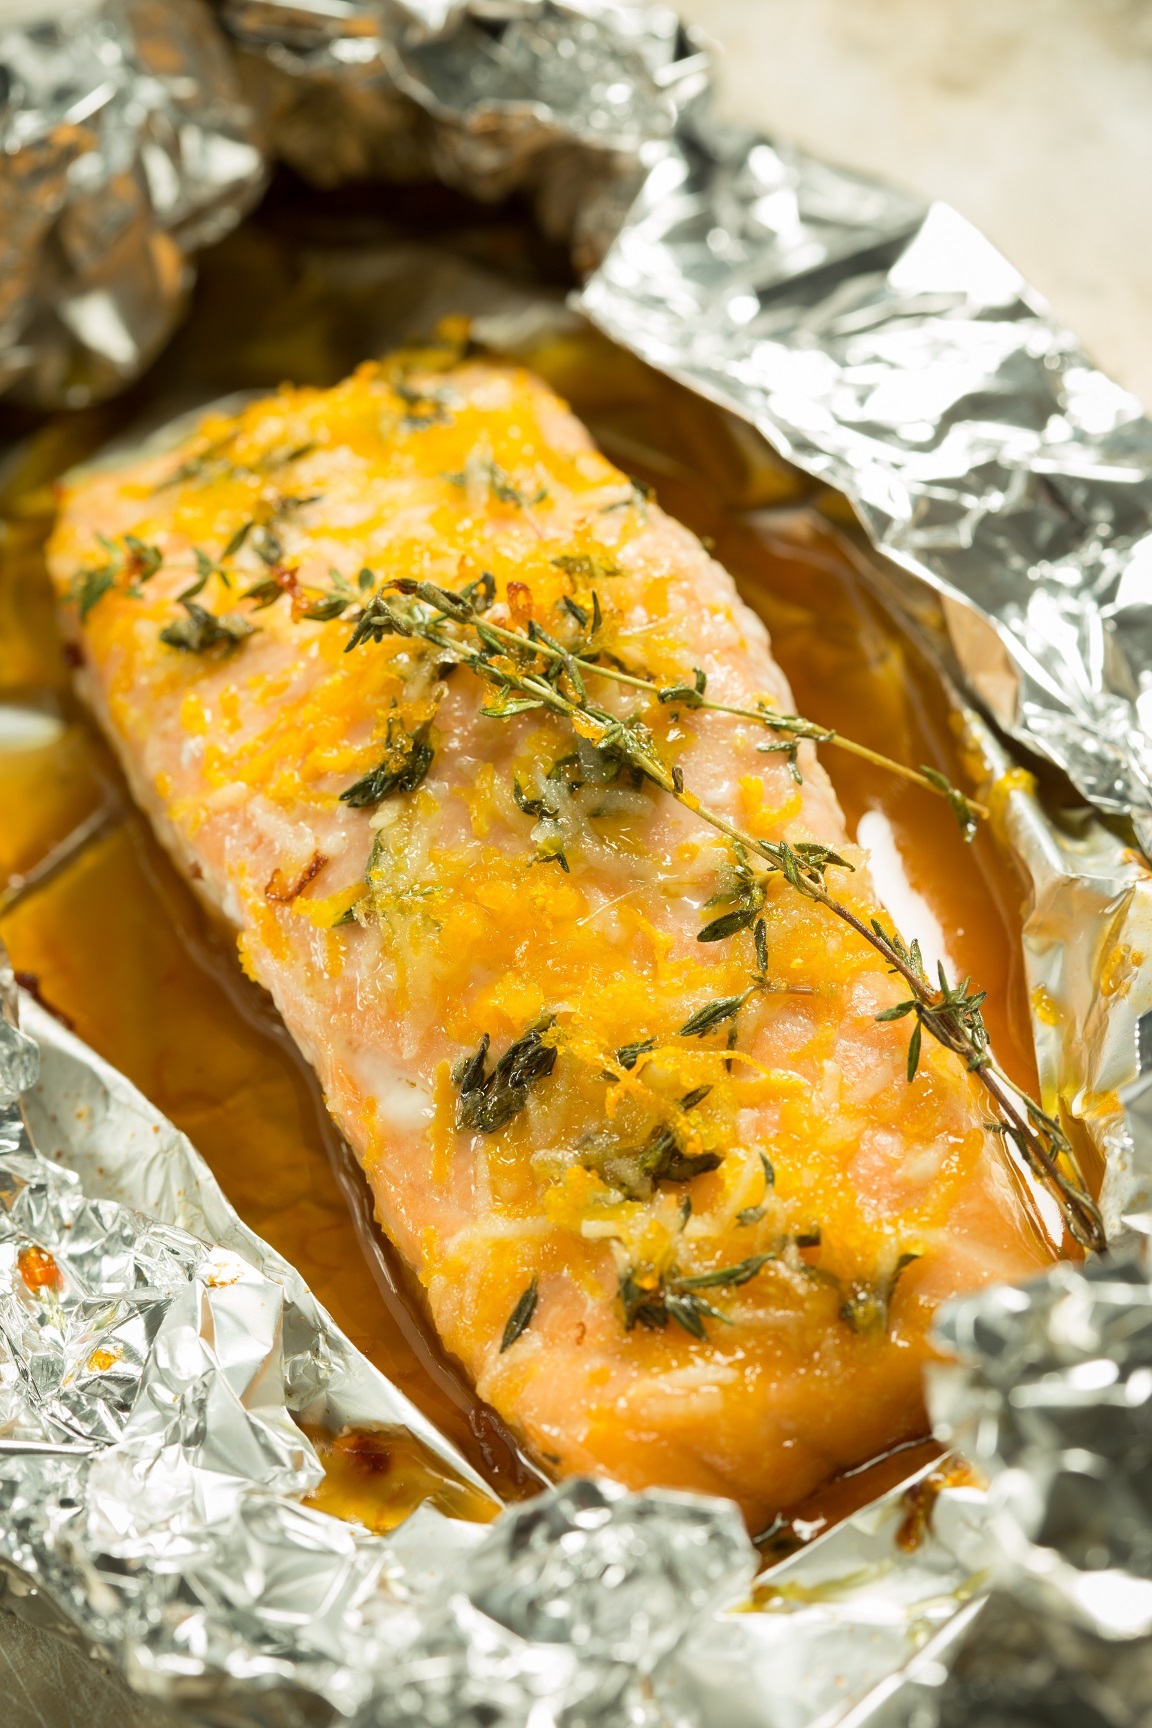 Meals for under £10: Foil Baked Salmon with Honey